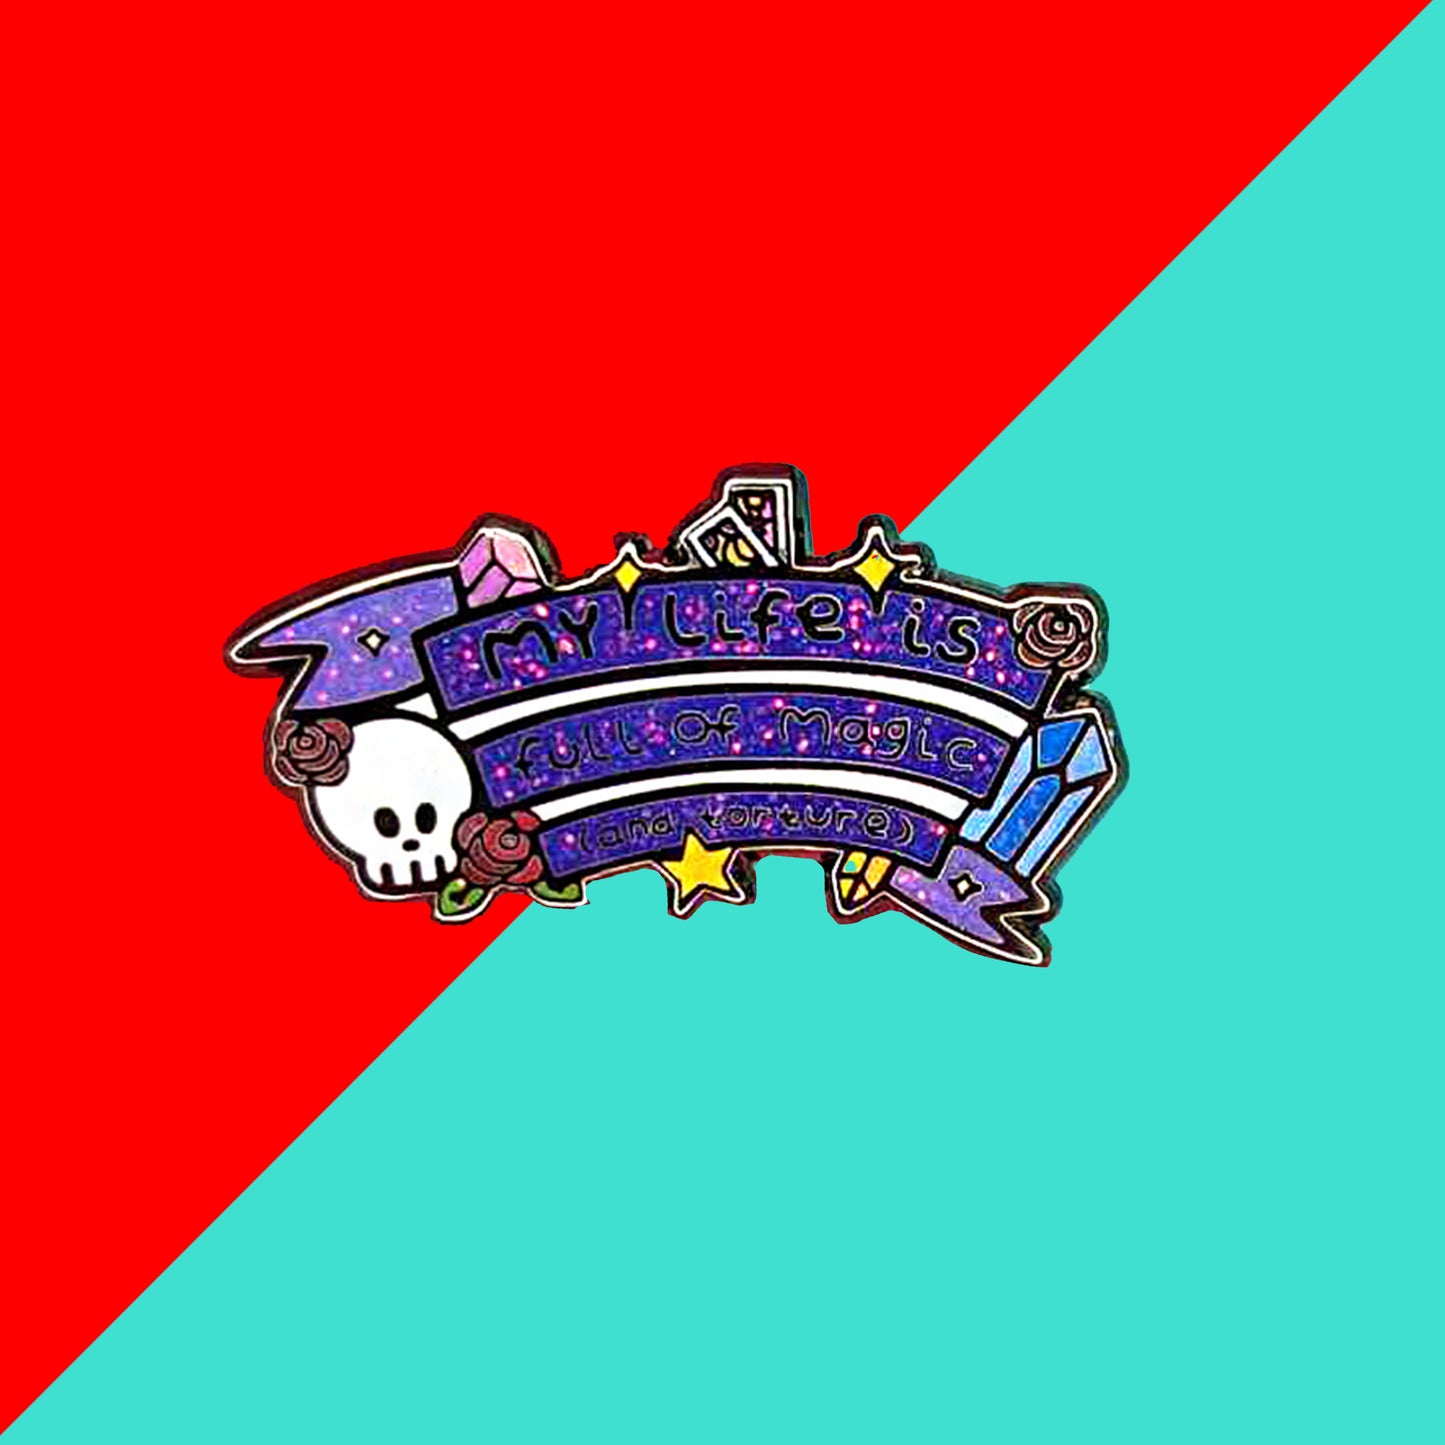 The My Life is Full of Magic & Torture Glitter Enamel Pin on a red and blue background. The glittery finish enamel pin badge features a purple banner sash of black text reading 'my life is full of magic (and torture)' with yellow sparkles, crystals, red roses, tarot cards and a skull head.